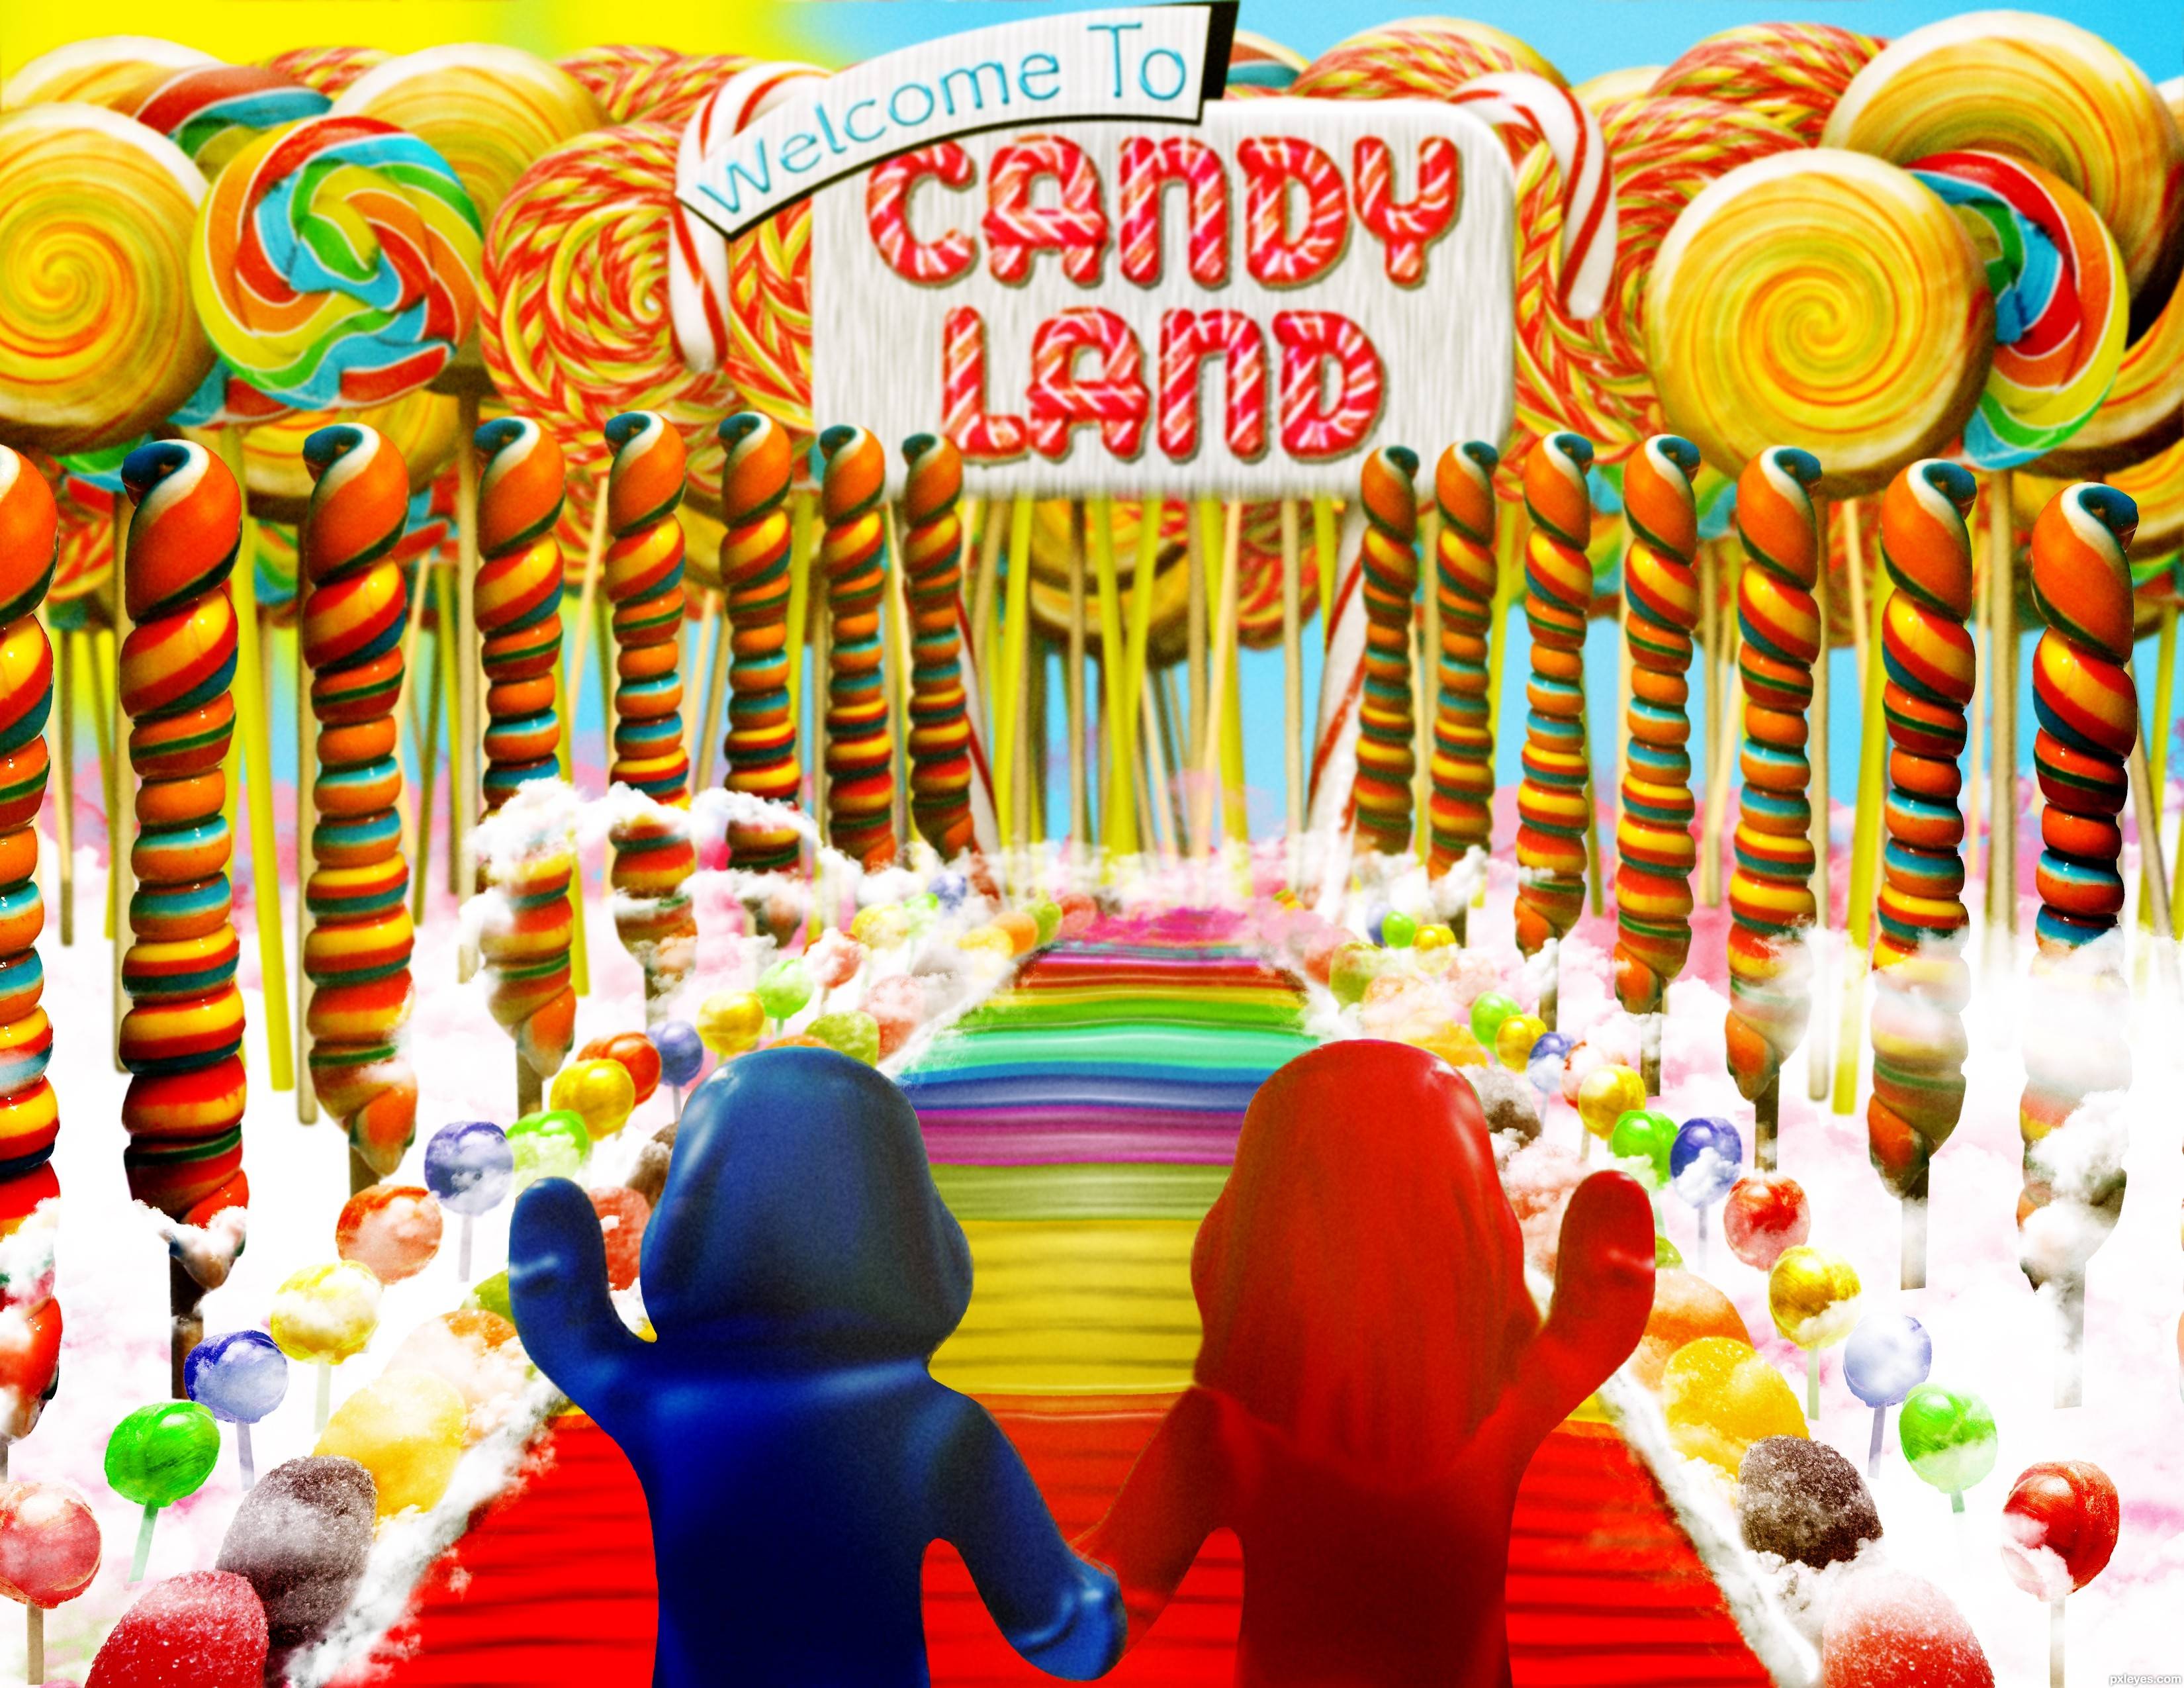 Welcome to Candy Land picture, by bjaockx for: game based photohop